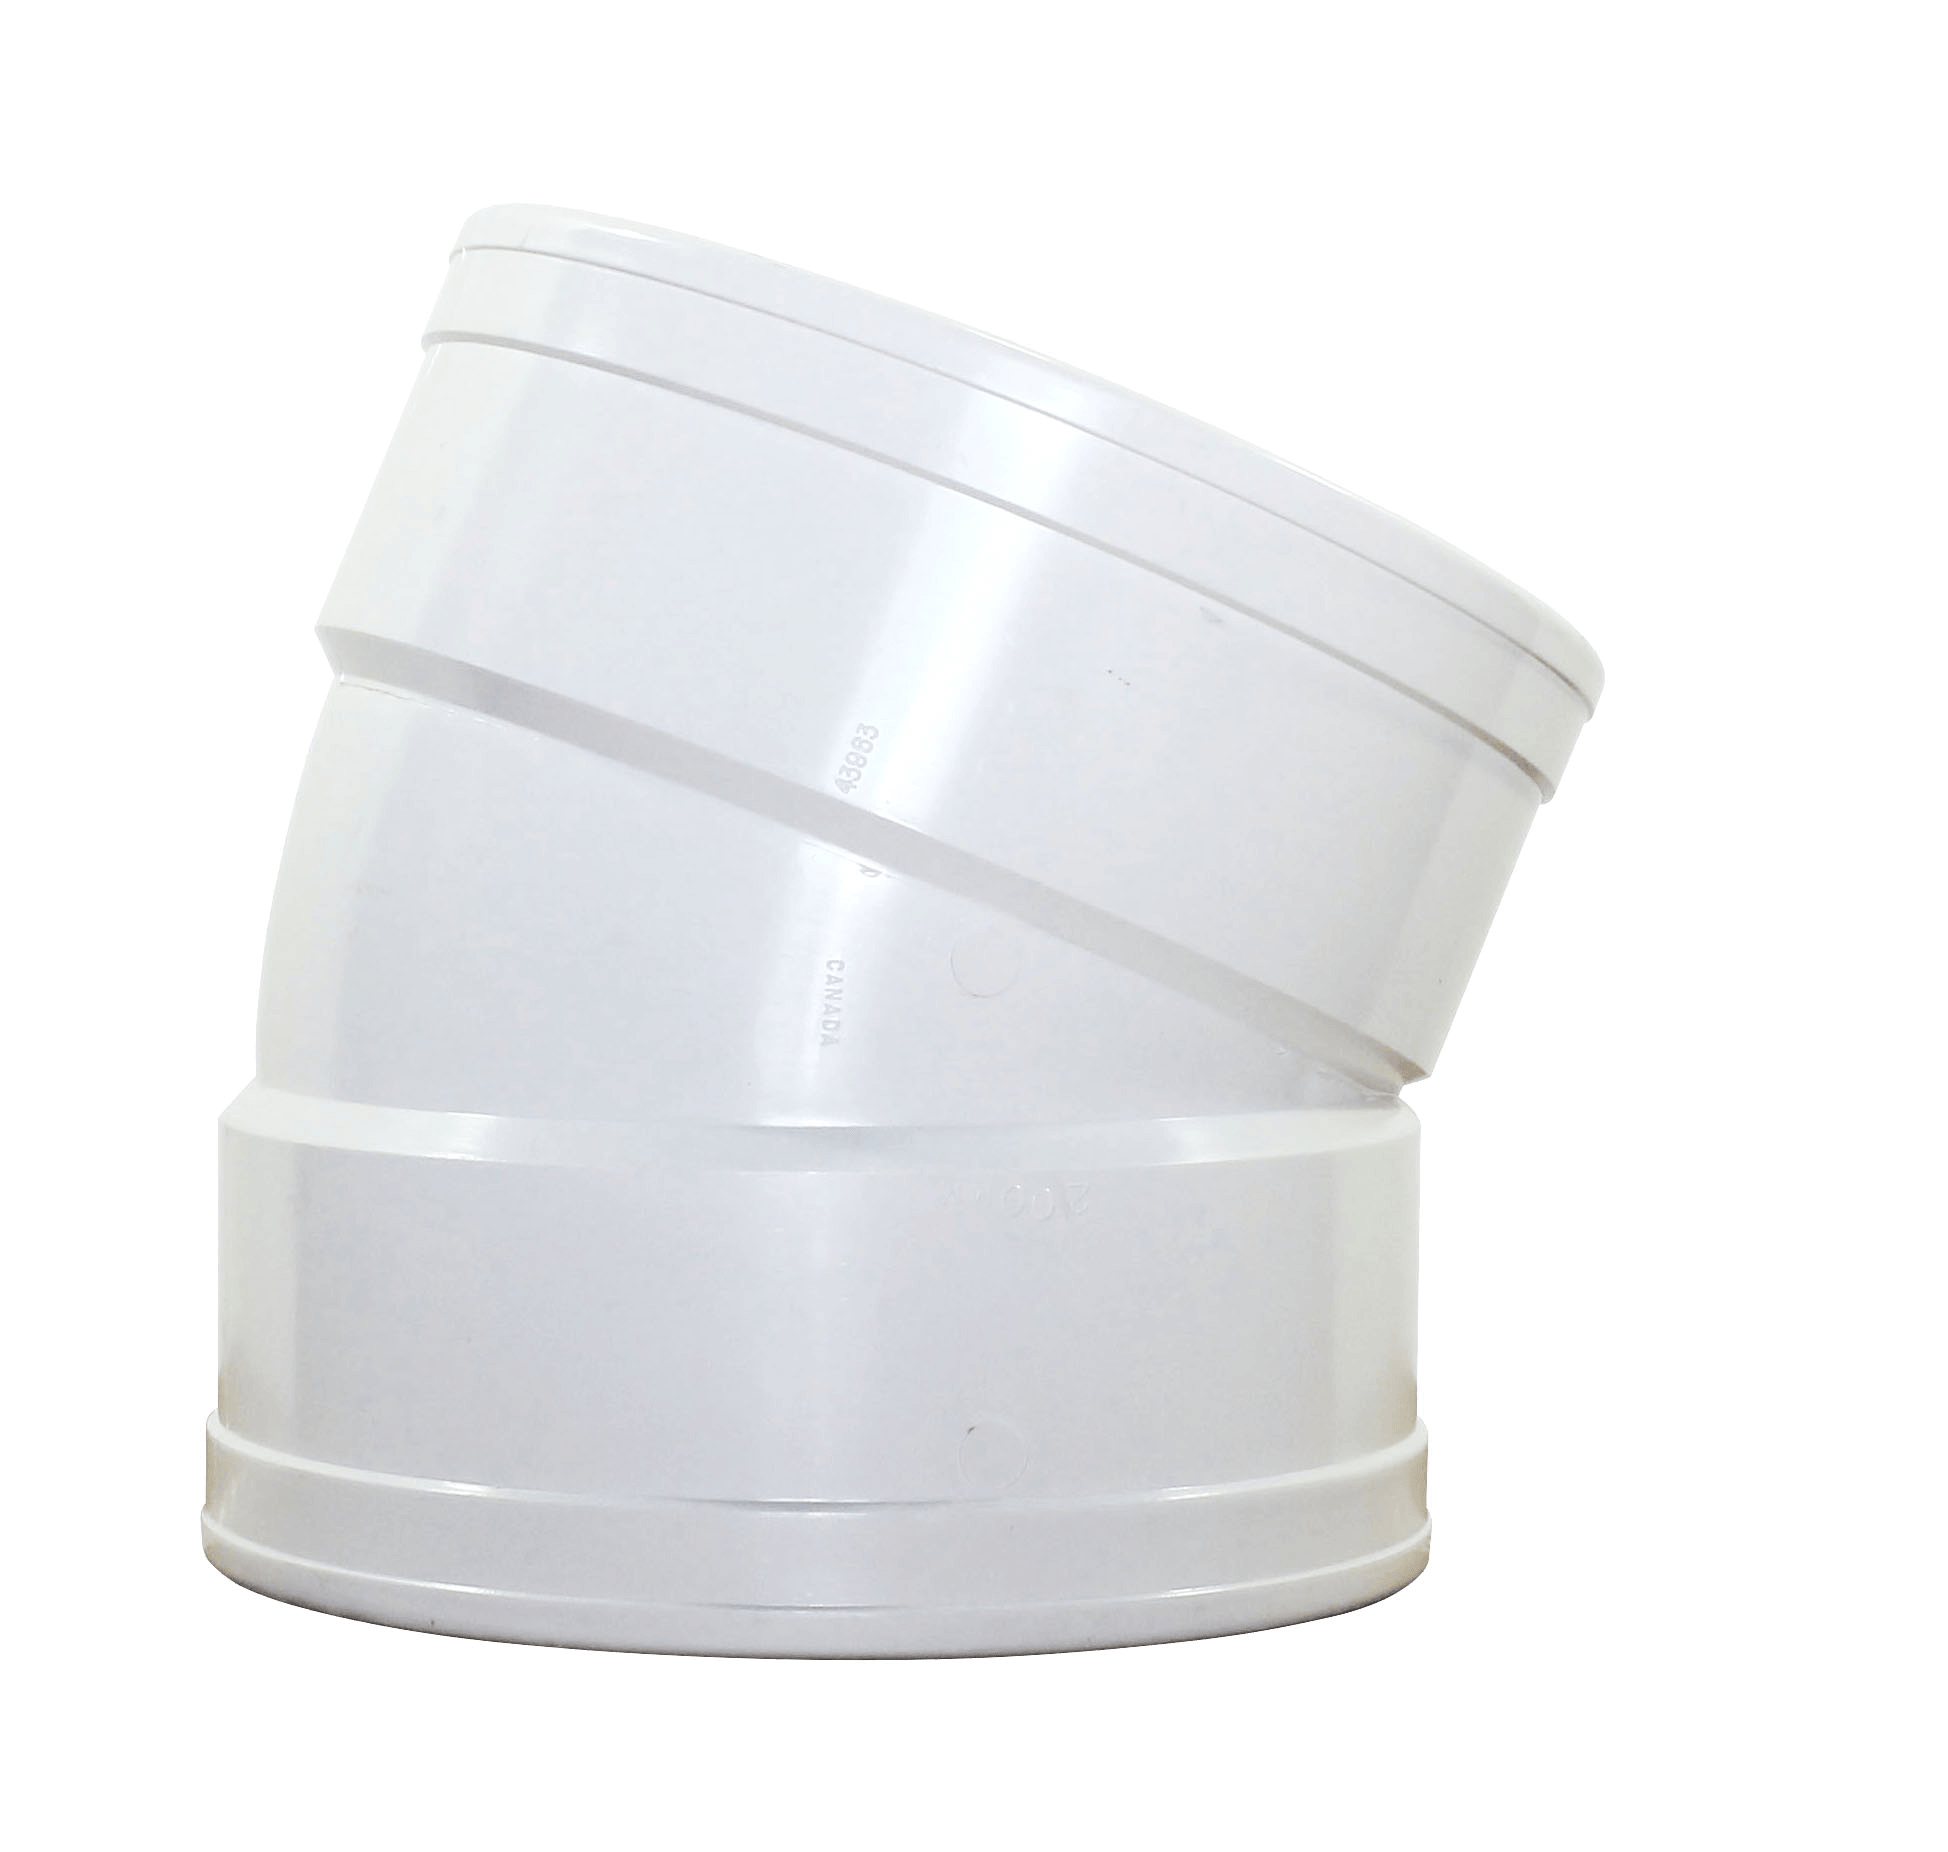 PVC Gasketed Sewer 22-1/2˚ Elbow